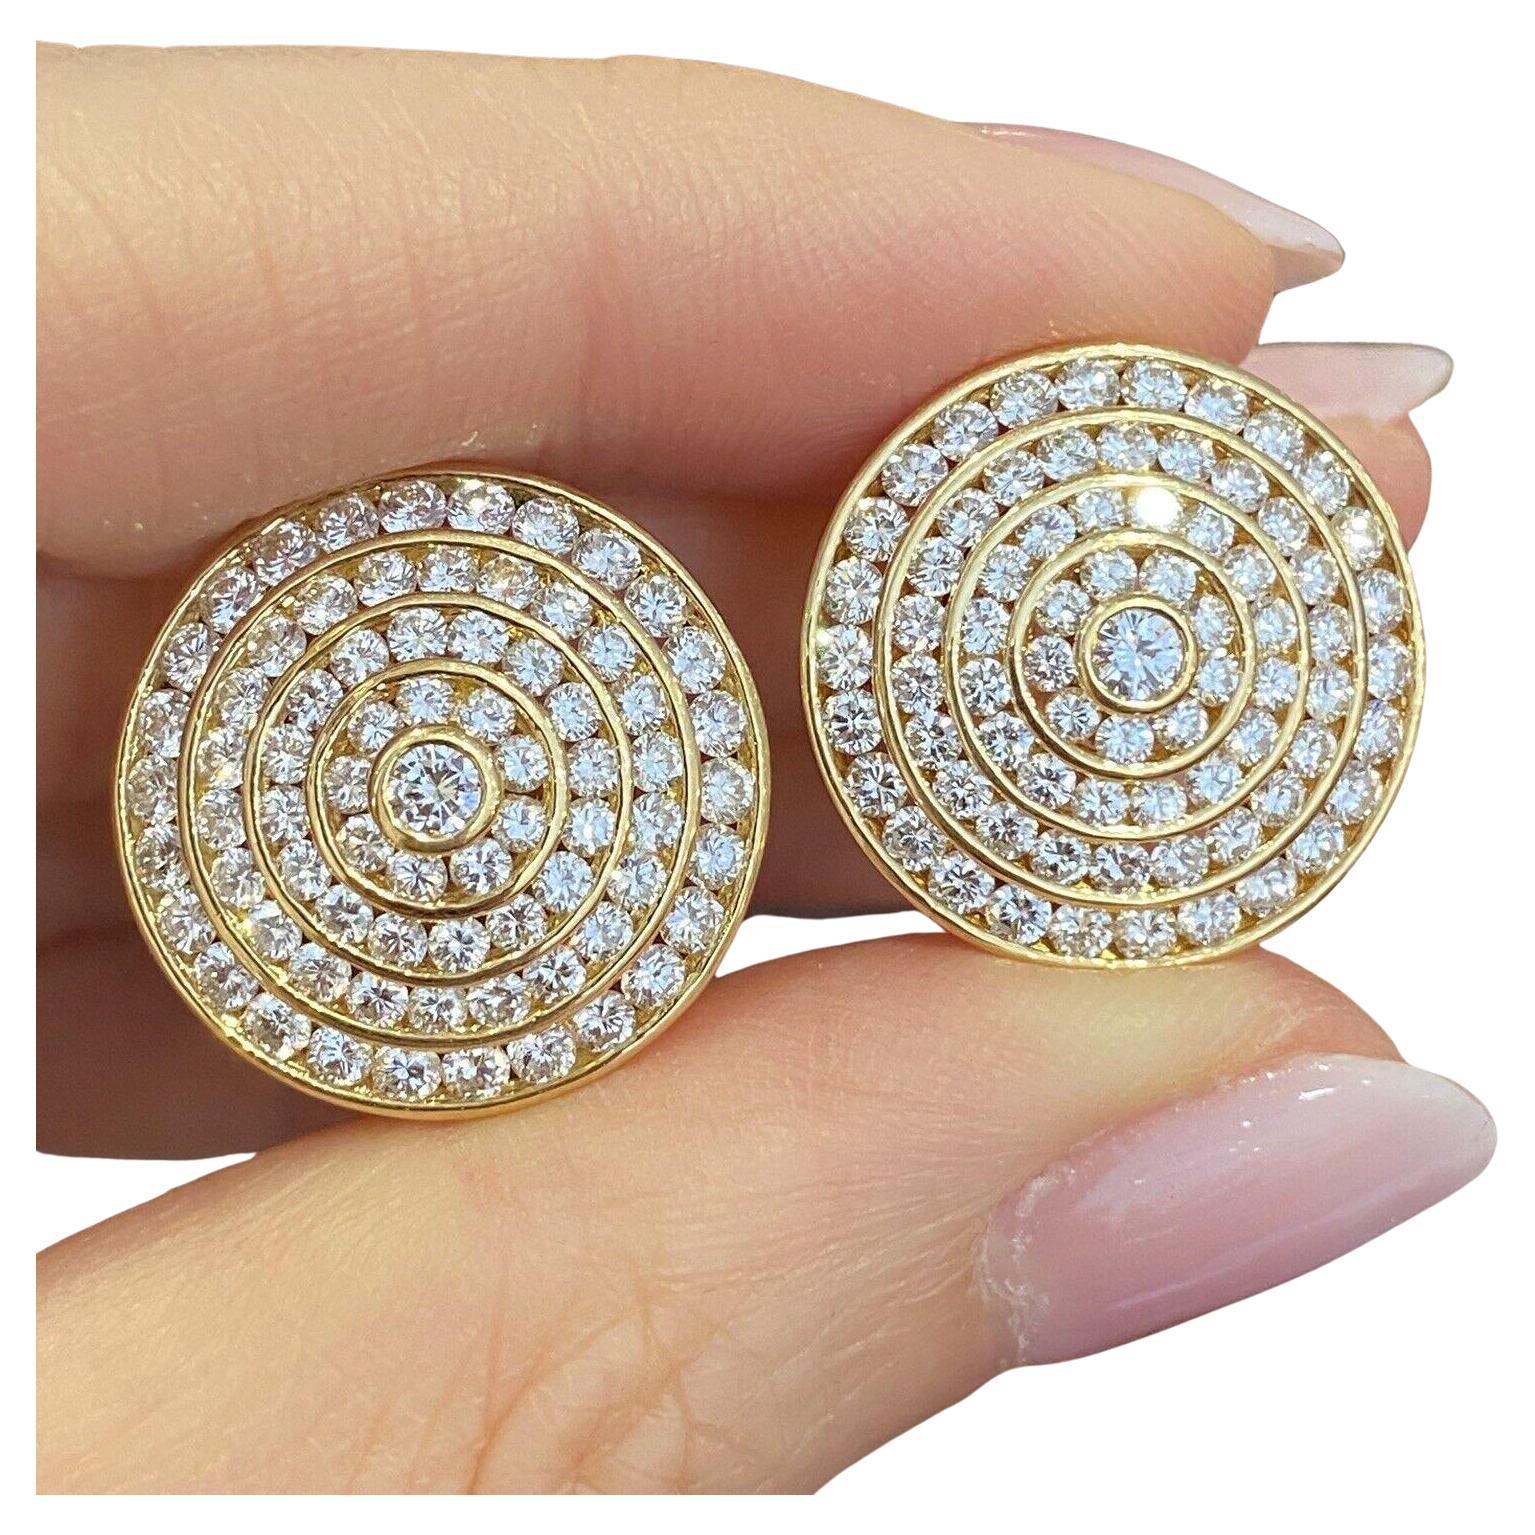 4 Row Circle Diamond Earrings 3.95 carat total weight in 18k Yellow Gold

Round Diamond Earrings features four concentric circles with Round Brilliant Diamonds channel set and one Round Diamond in the center in 18k Yellow Gold. The earrings are